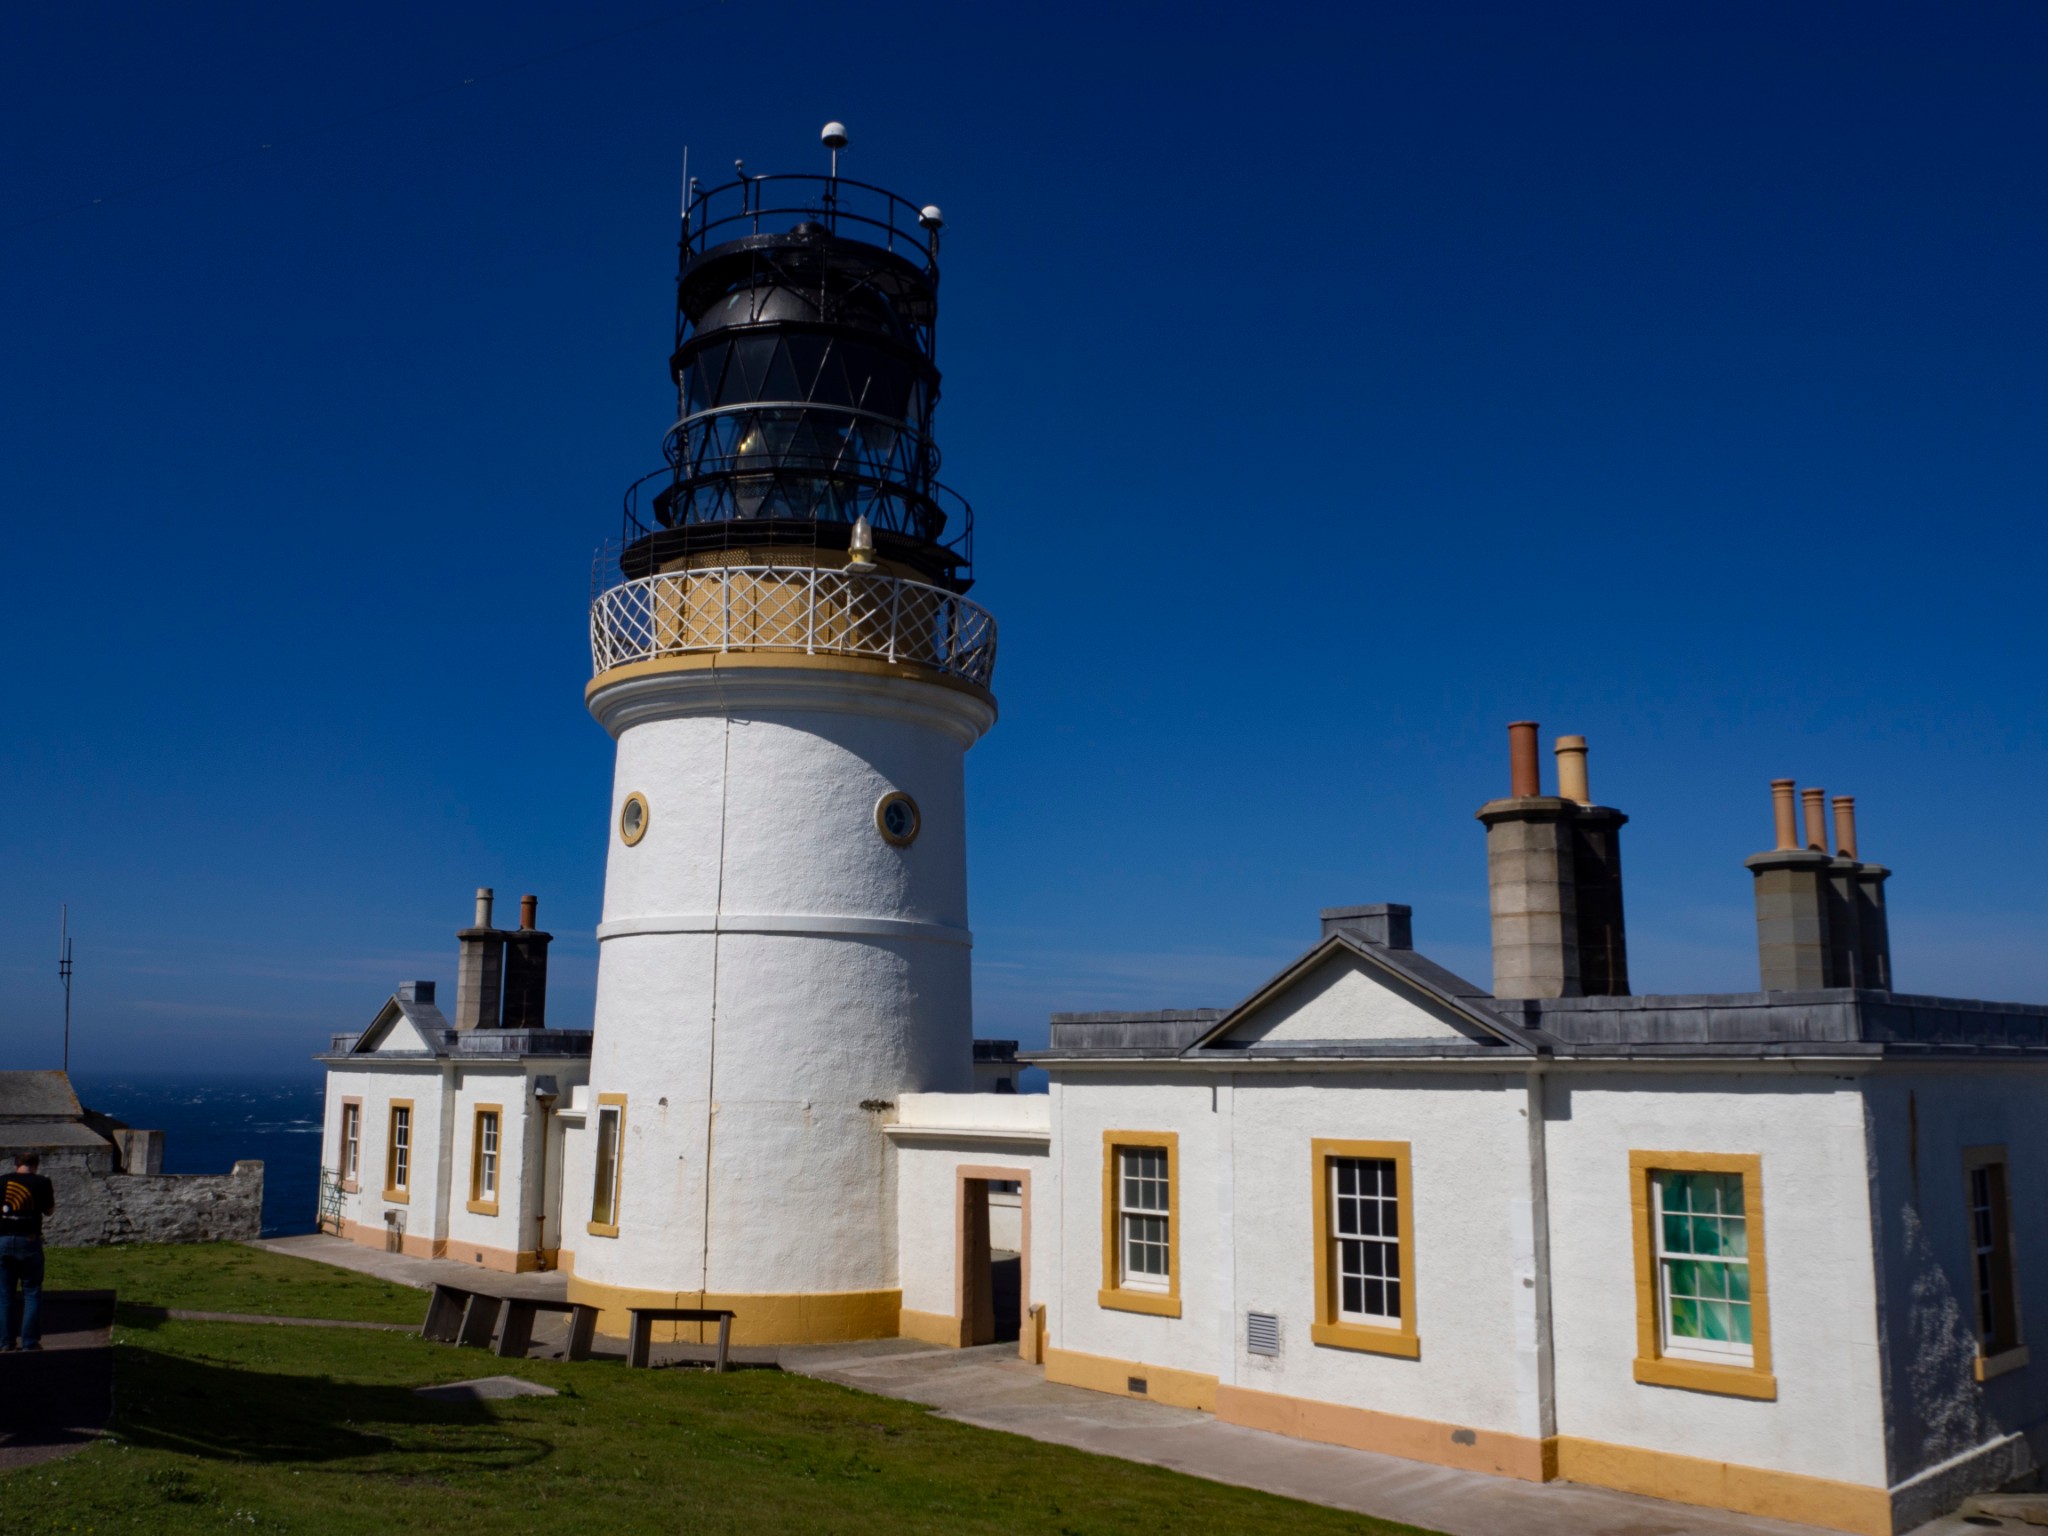 Visiting Sumburgh Head during Covid-19